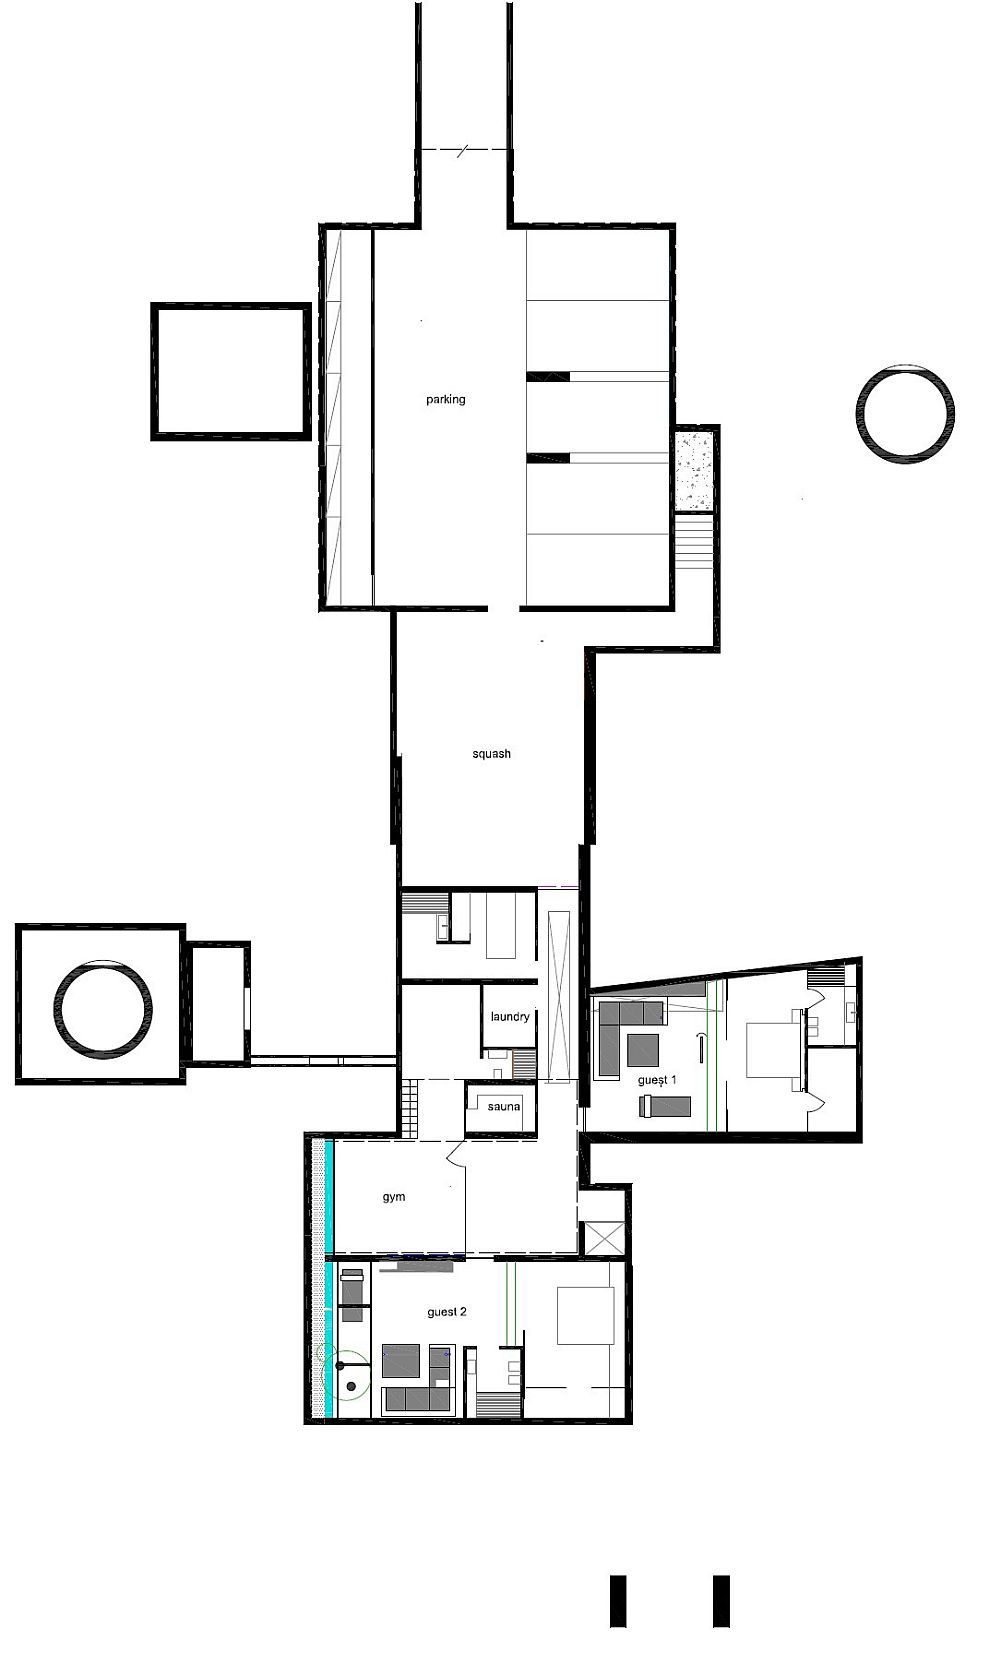 Floor plan of the H3 with the public areas